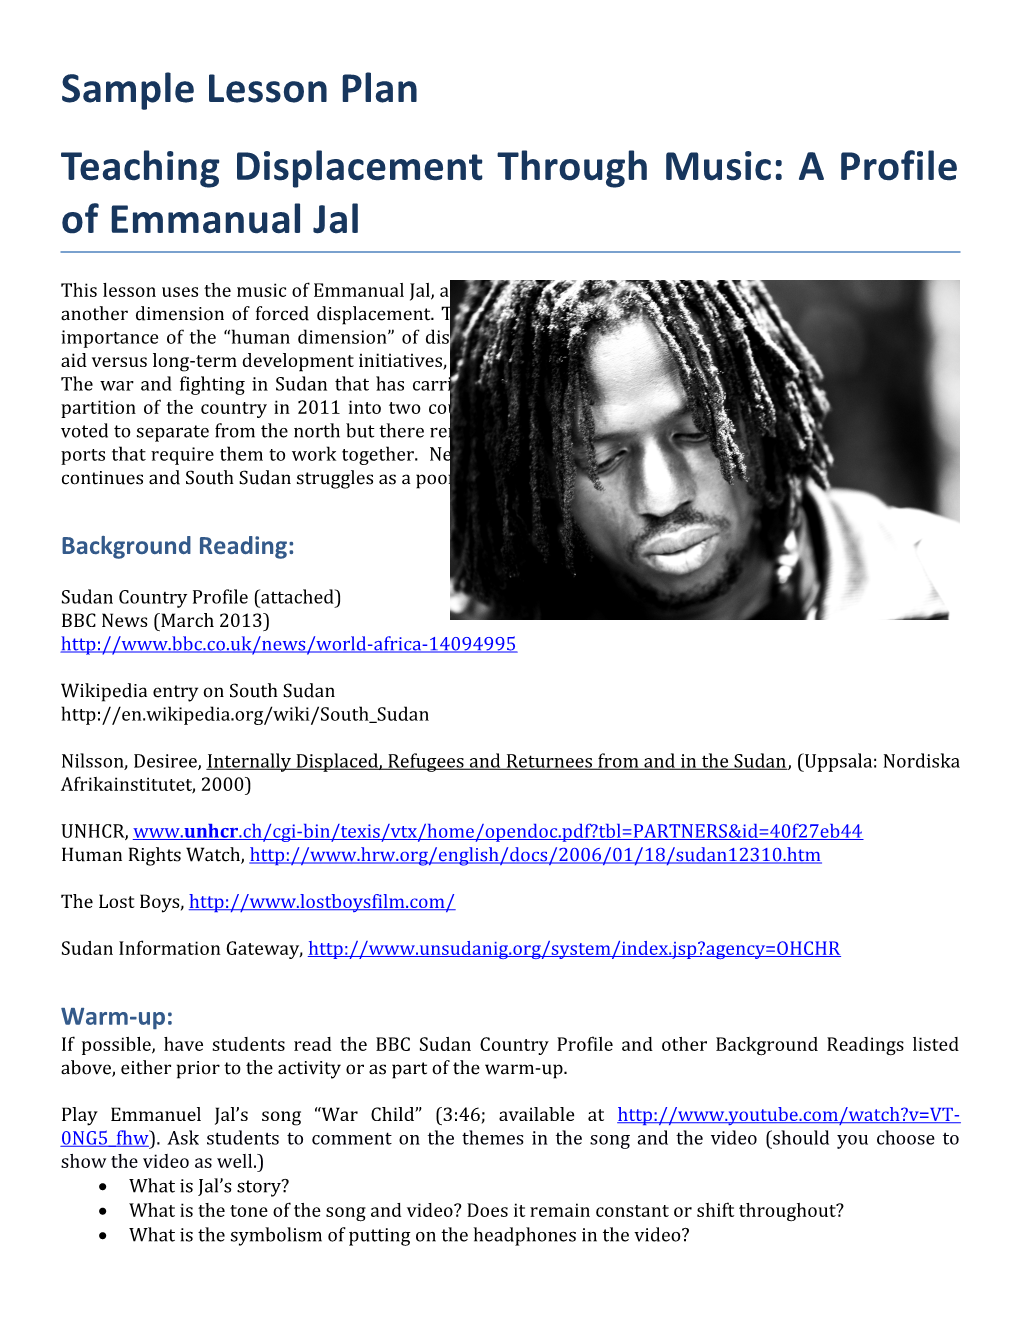 Teaching Displacement Through Music: a Profile of Emmanual Jal